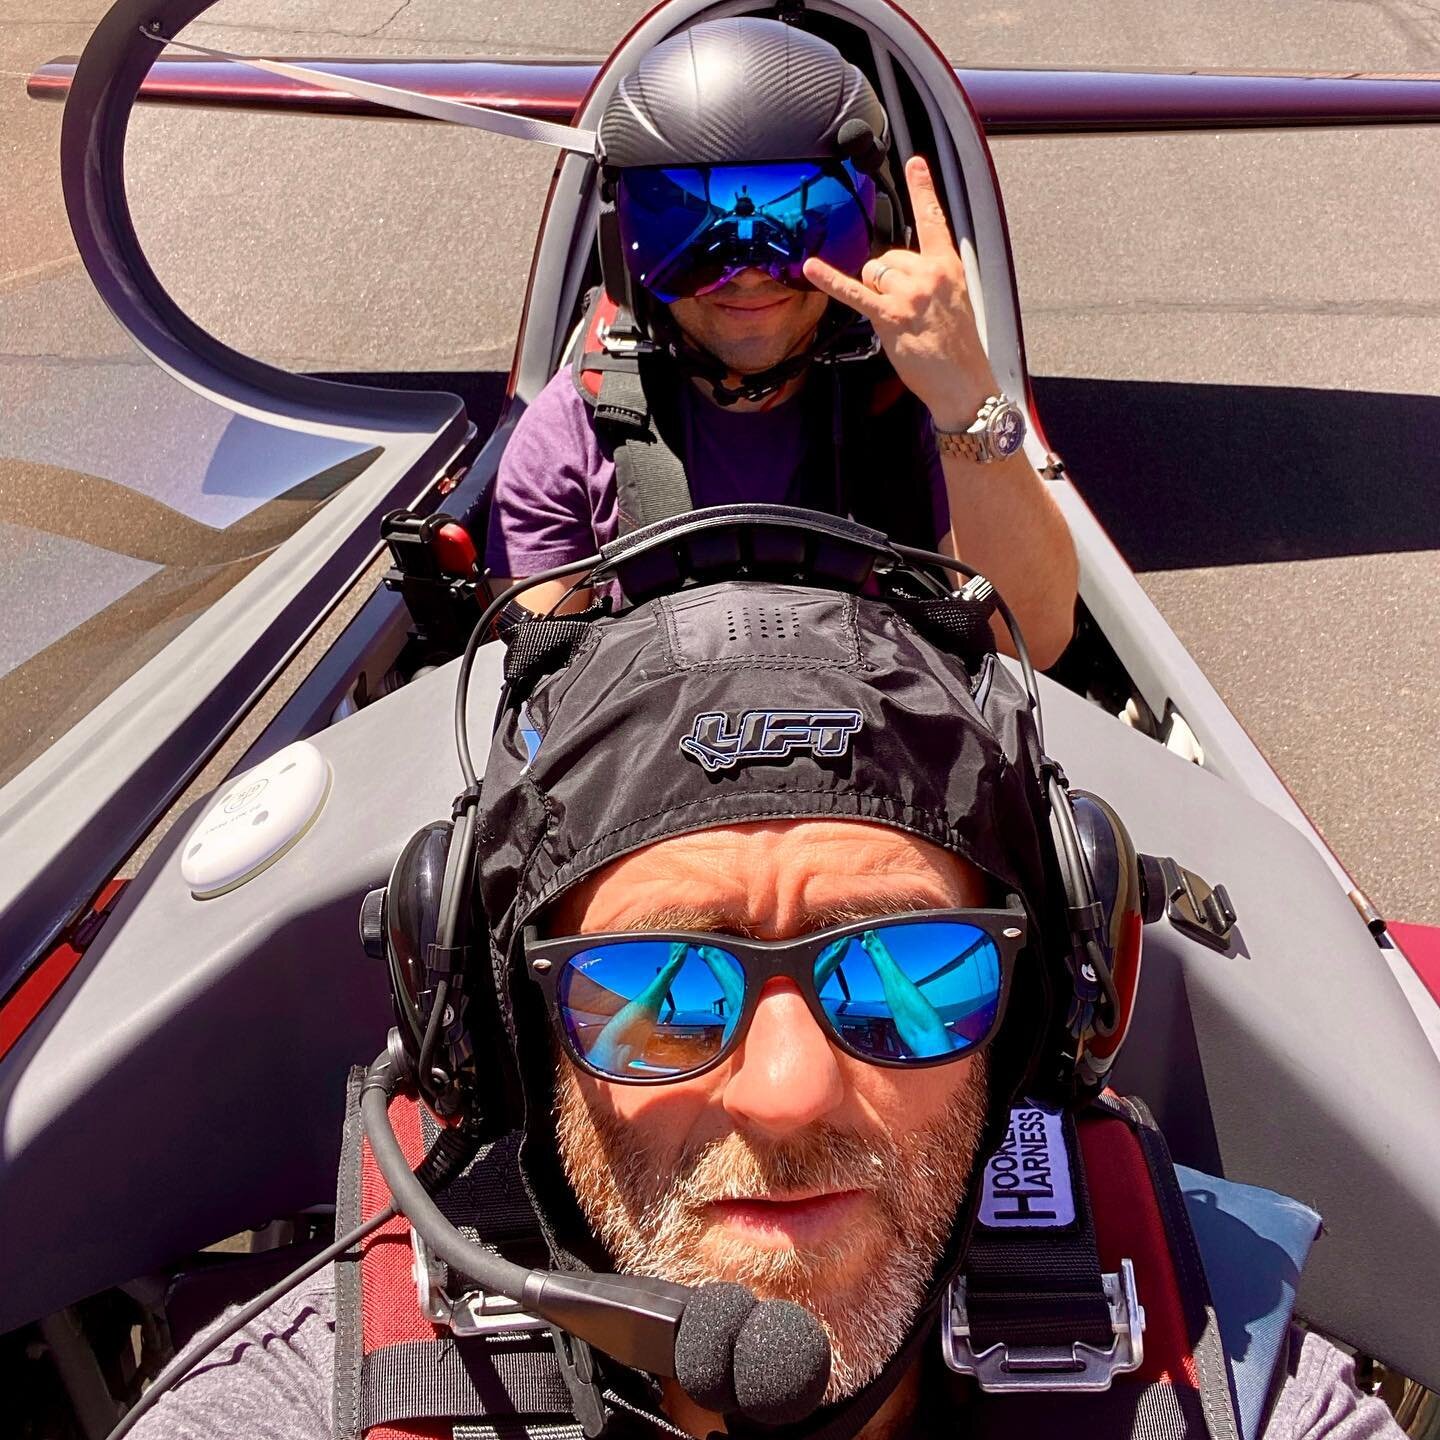 Michael from Montreal is an airline pilot who happened to be on a long layover after flying into SFO, and wanted shake the dust off since it&rsquo;s been a while since he&rsquo;s flown an Extra. He did fantastic!  #mpaviation #extra300 #extraaircraft